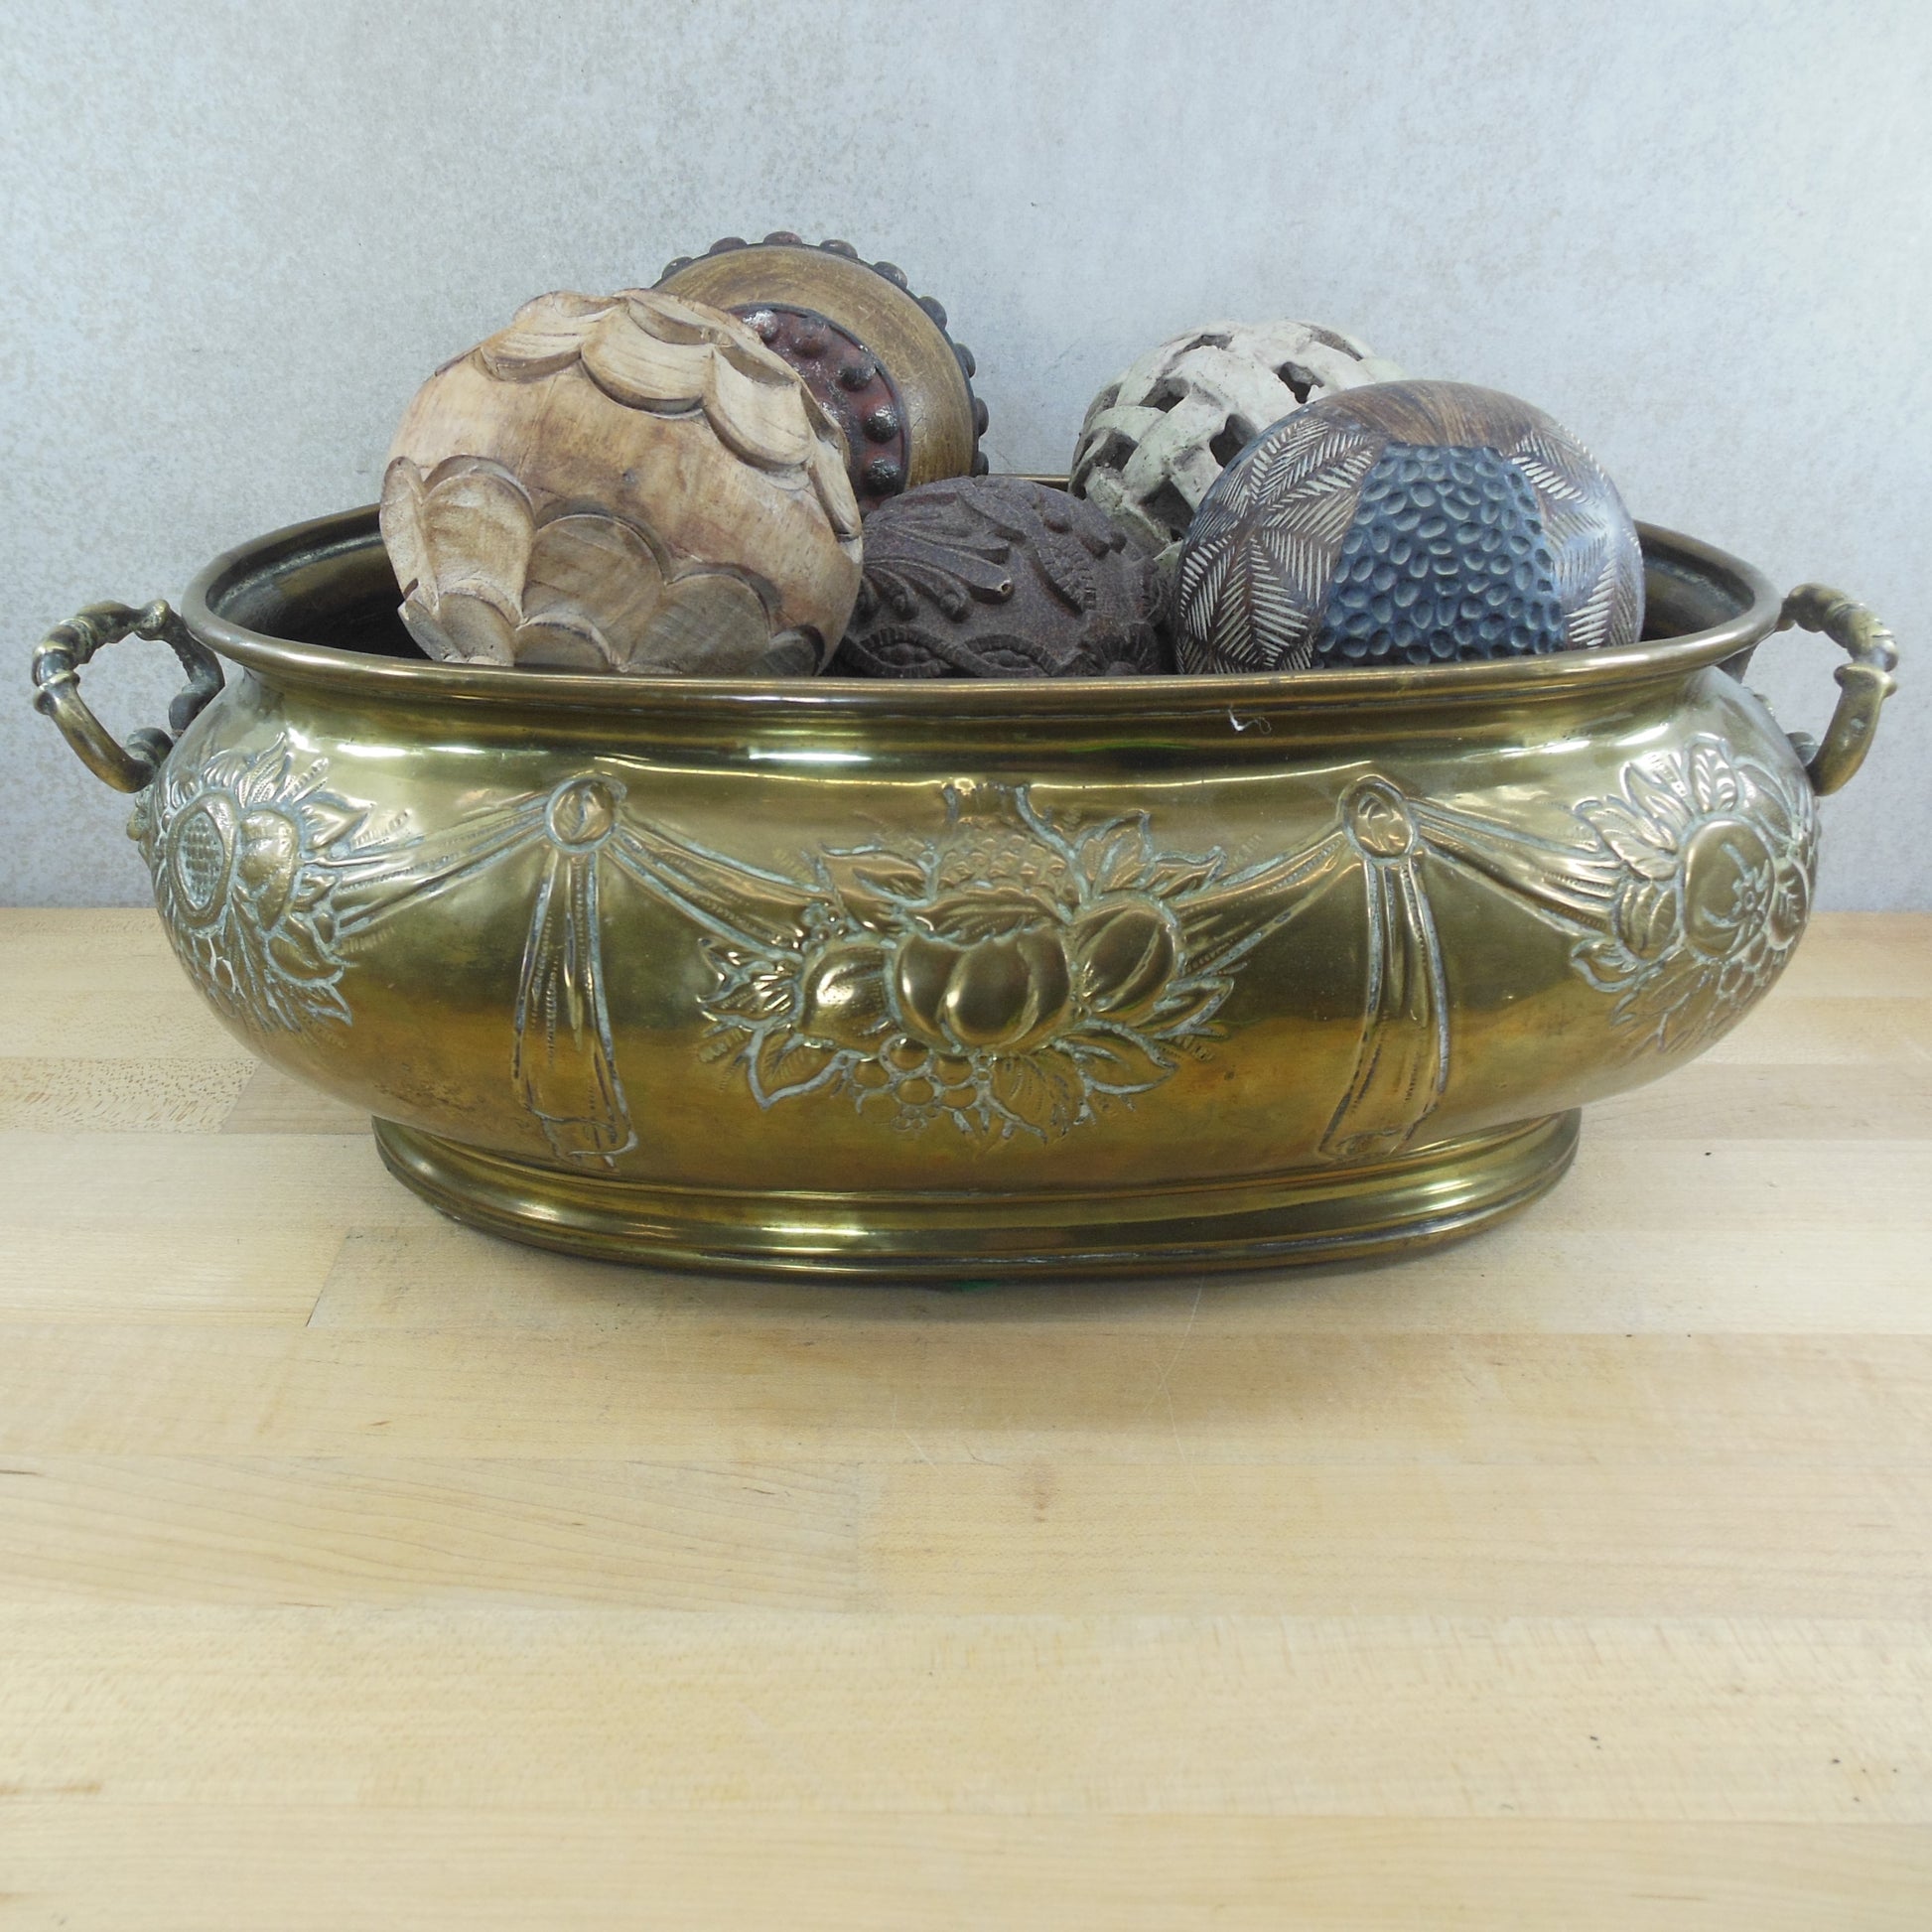 Antique English Repousse Brass Oval Planter Jardiniere & Carved Balls Seeds Gourds Floral Flowers